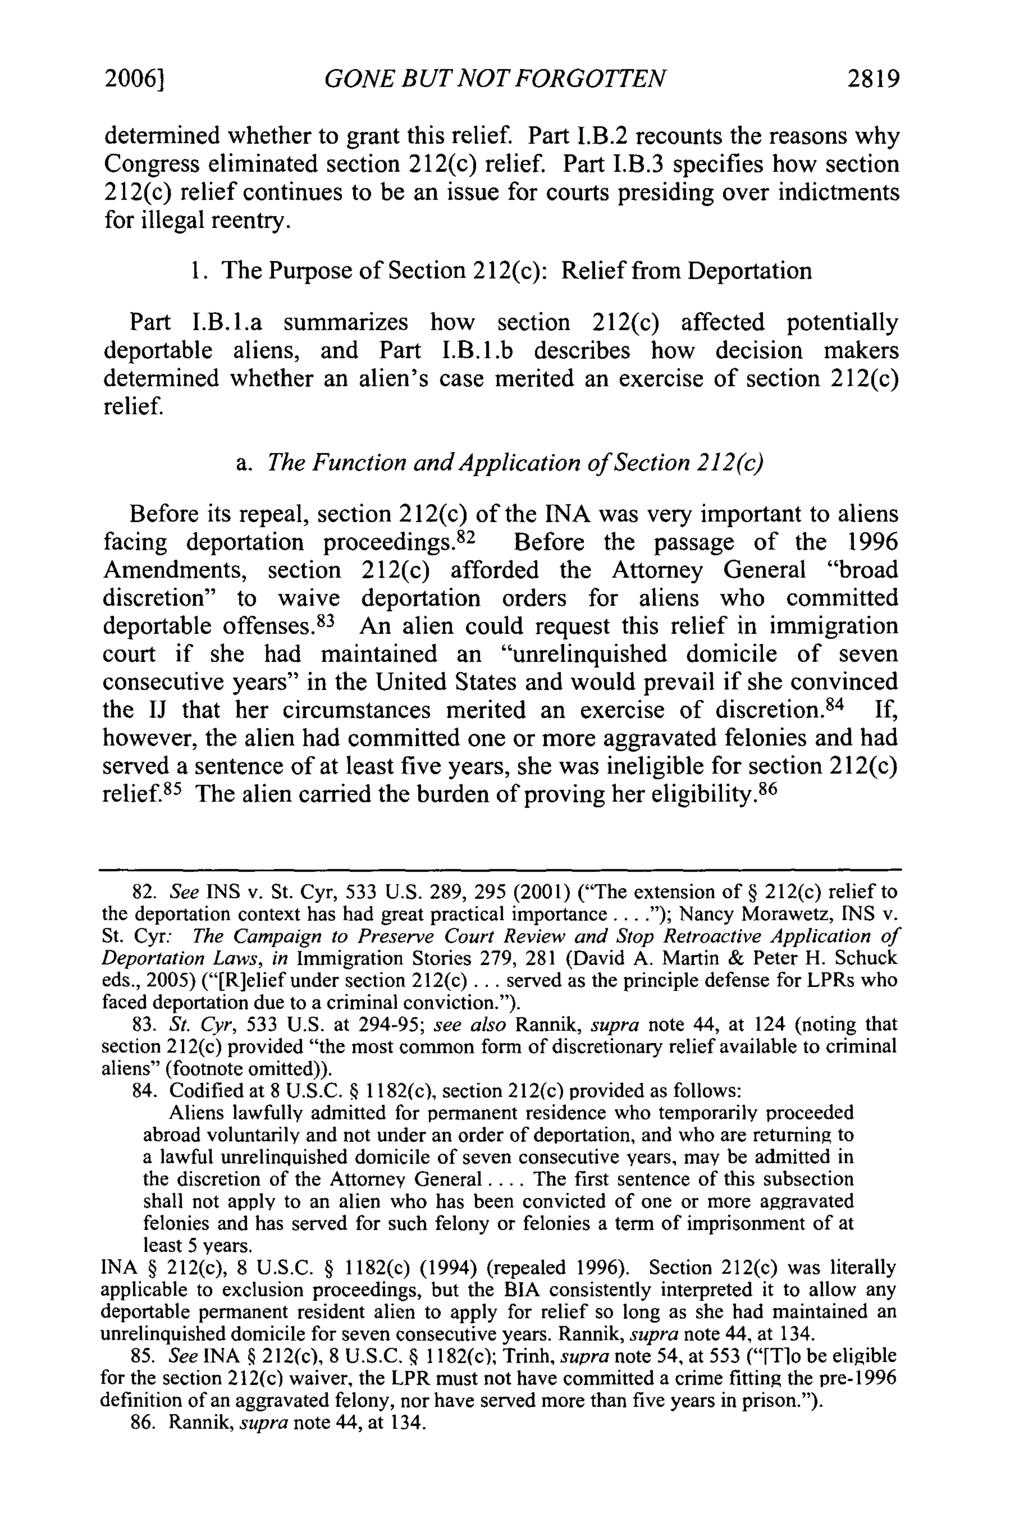 2006] GONE BUT NOT FORGOTTEN 2819 determined whether to grant this relief. Part I.B.2 recounts the reasons why Congress eliminated section 212(c) relief. Part I.B.3 specifies how section 212(c) relief continues to be an issue for courts presiding over indictments for illegal reentry.